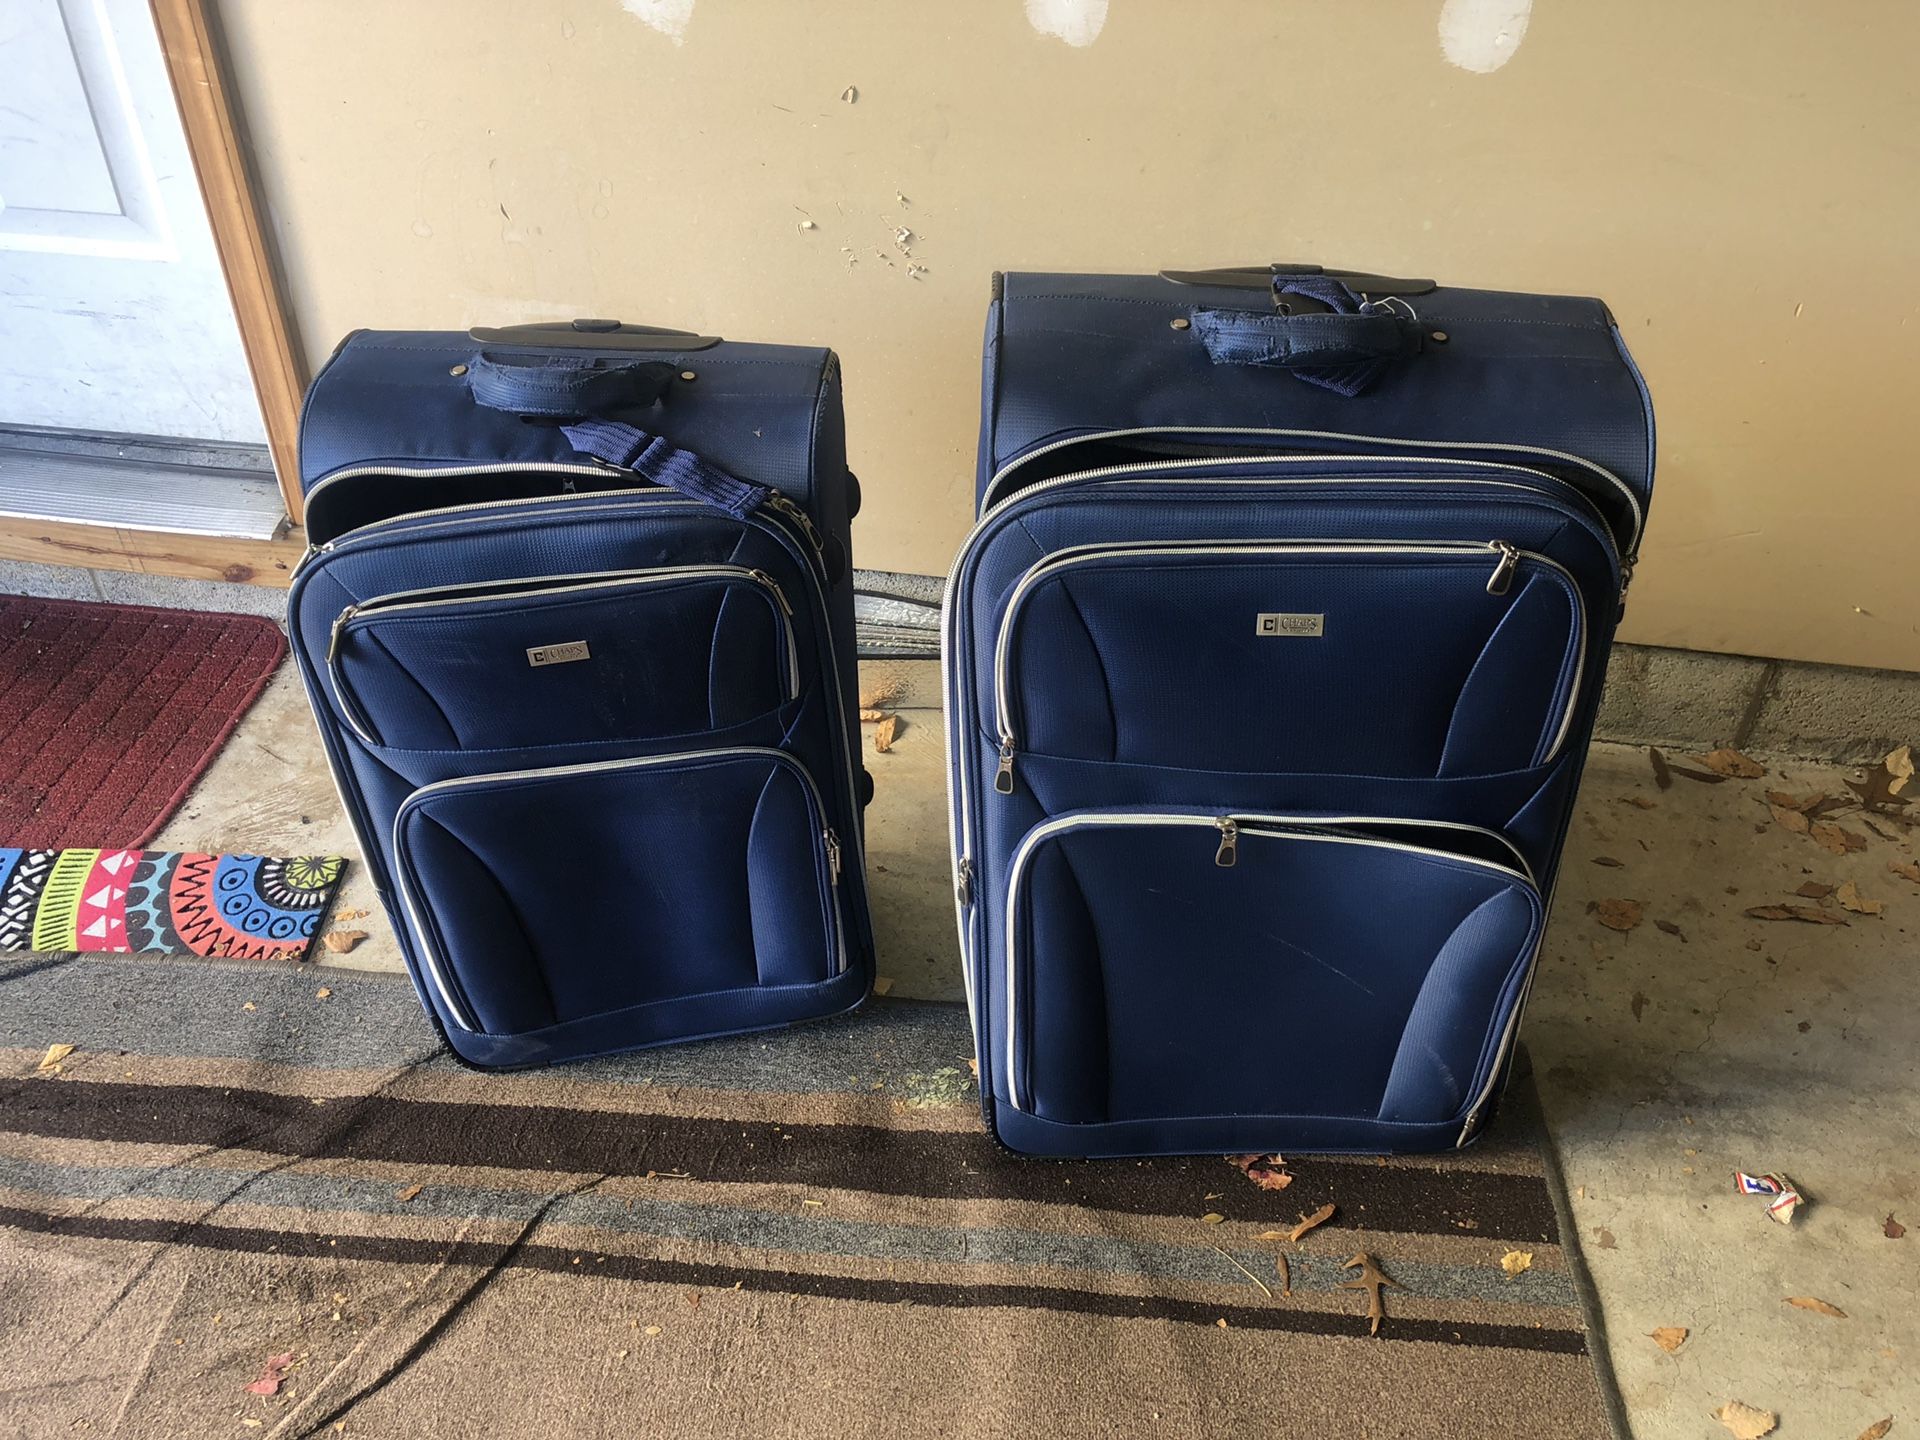 Chaps Luggage 🧳 2 pieces